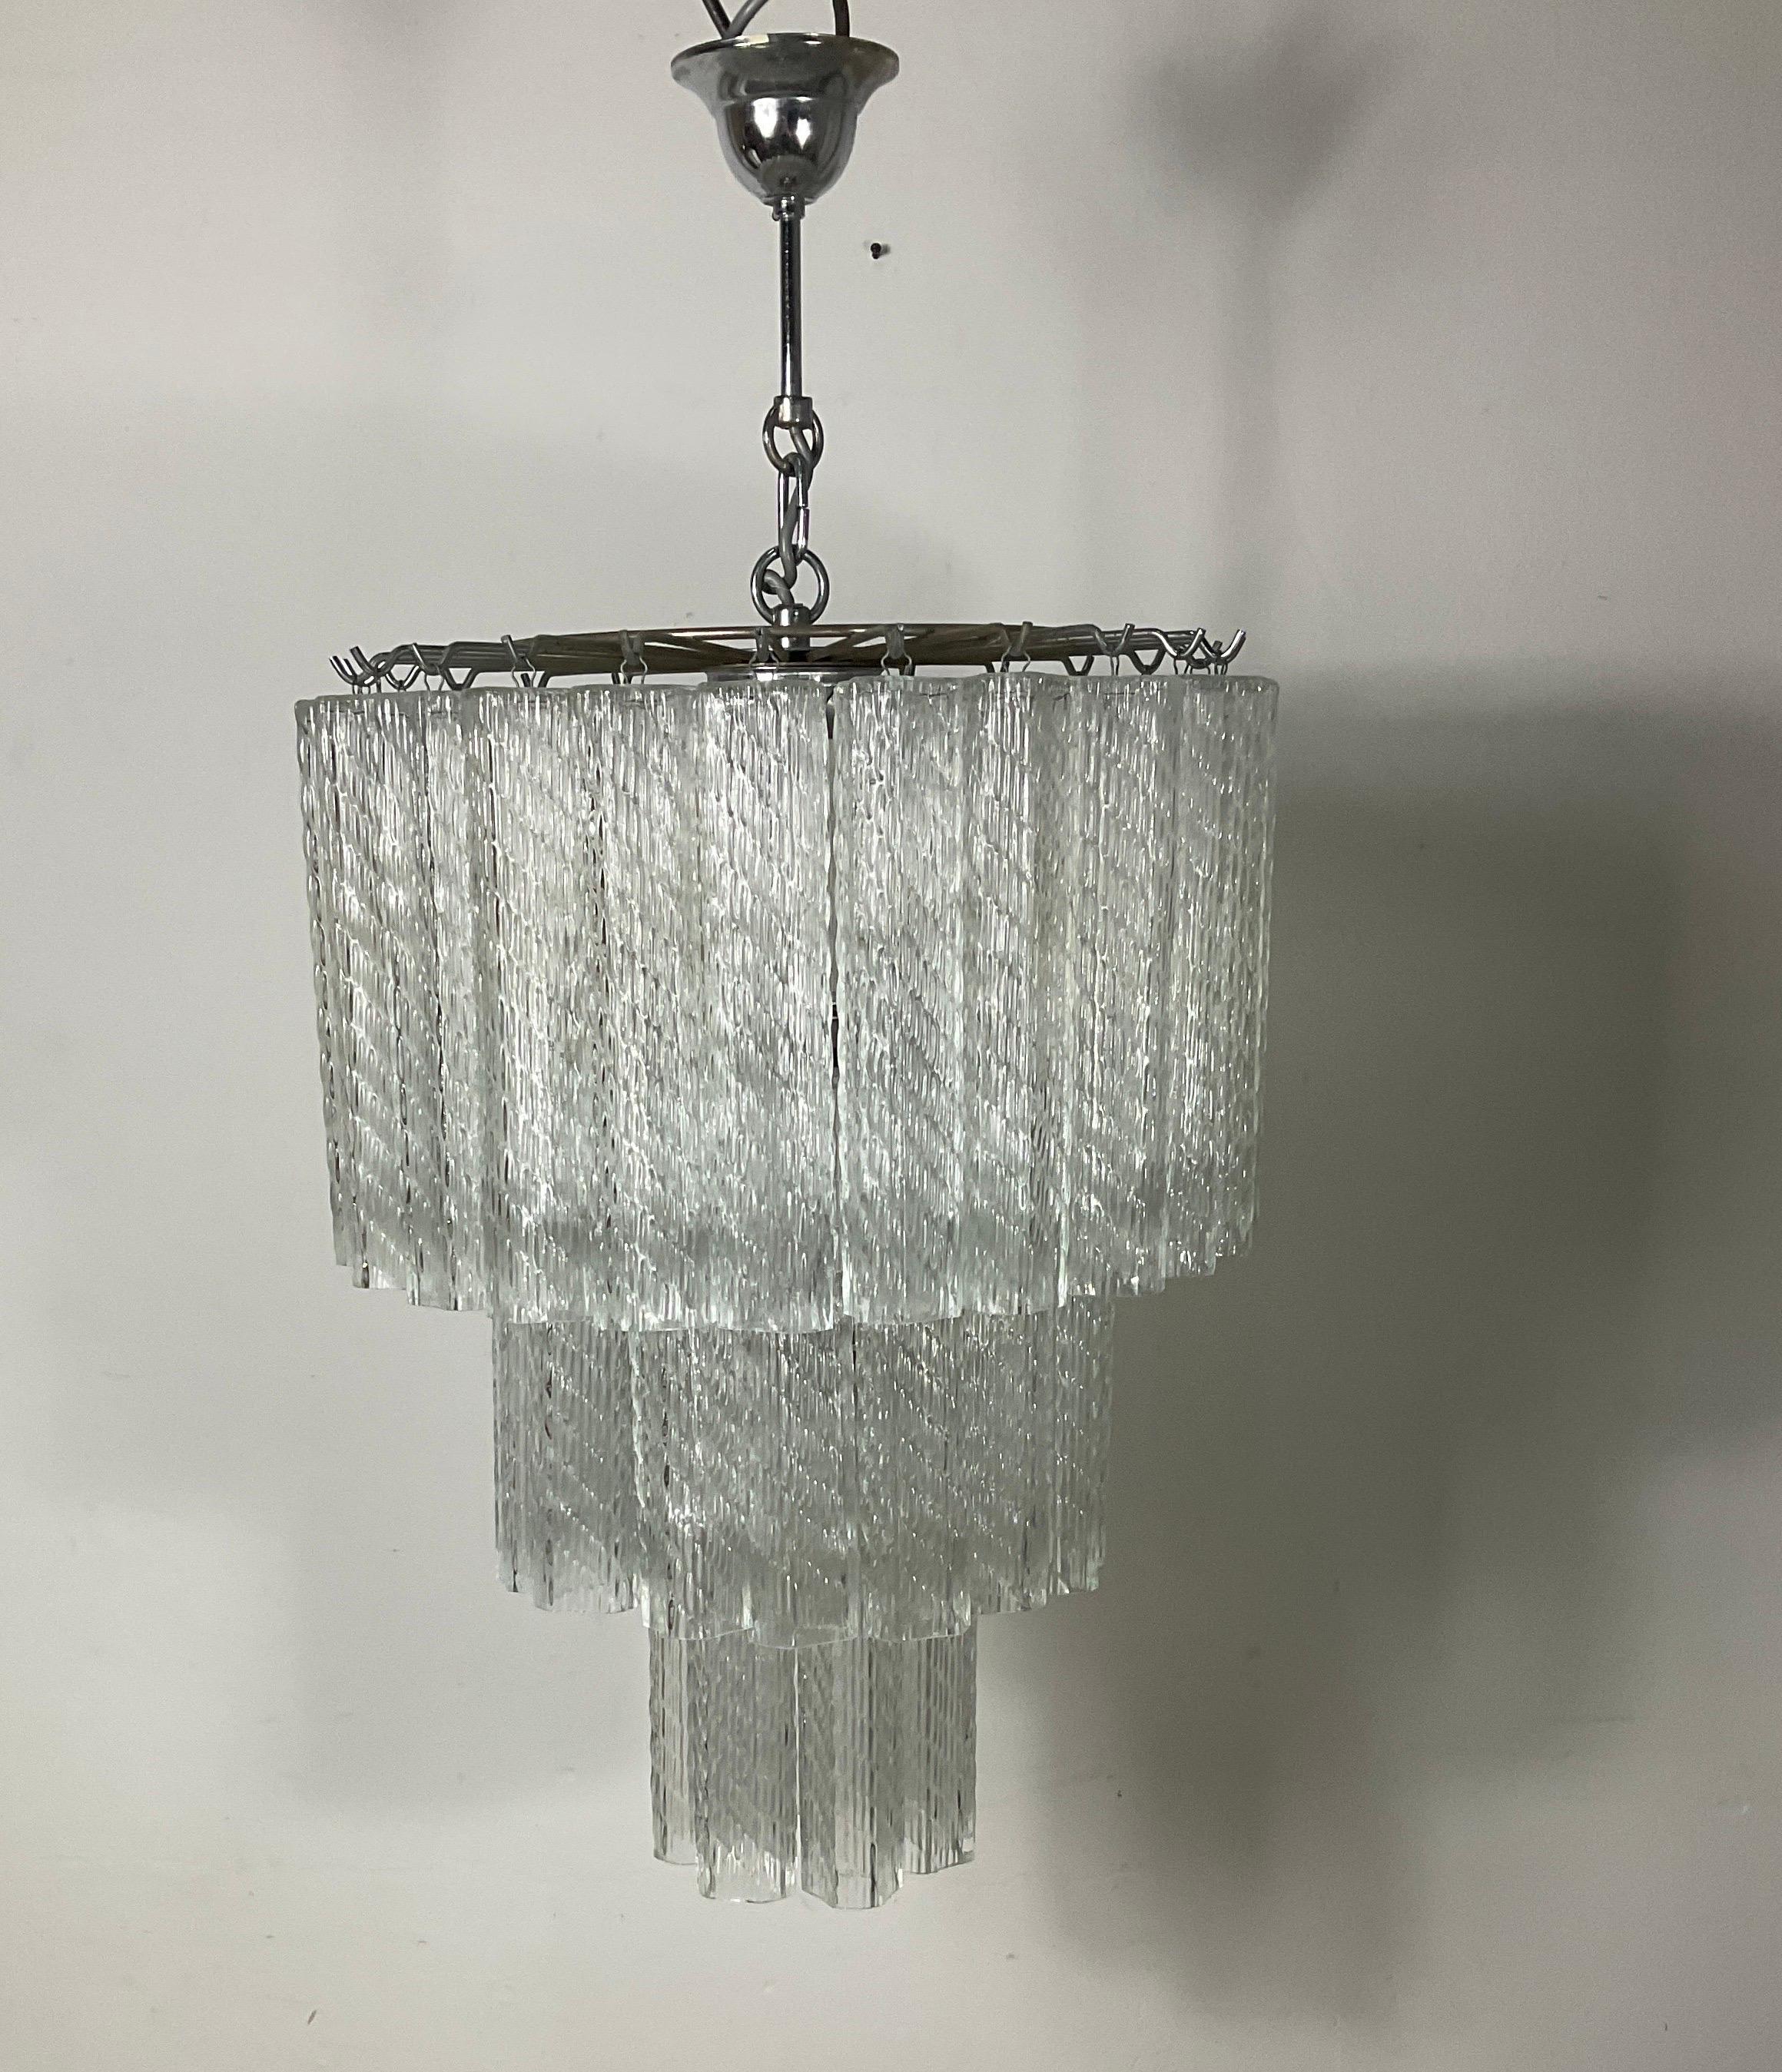 Splendid Venini Murano chandelier made on three levels of the 70s, gold-coloured tubes no. 8 lights, spectacular effect. Excellent state of preservation. Chrome-plated structure. Paolo Venini, (born 1895 – died in July 1959, Venice, Italy), Italian